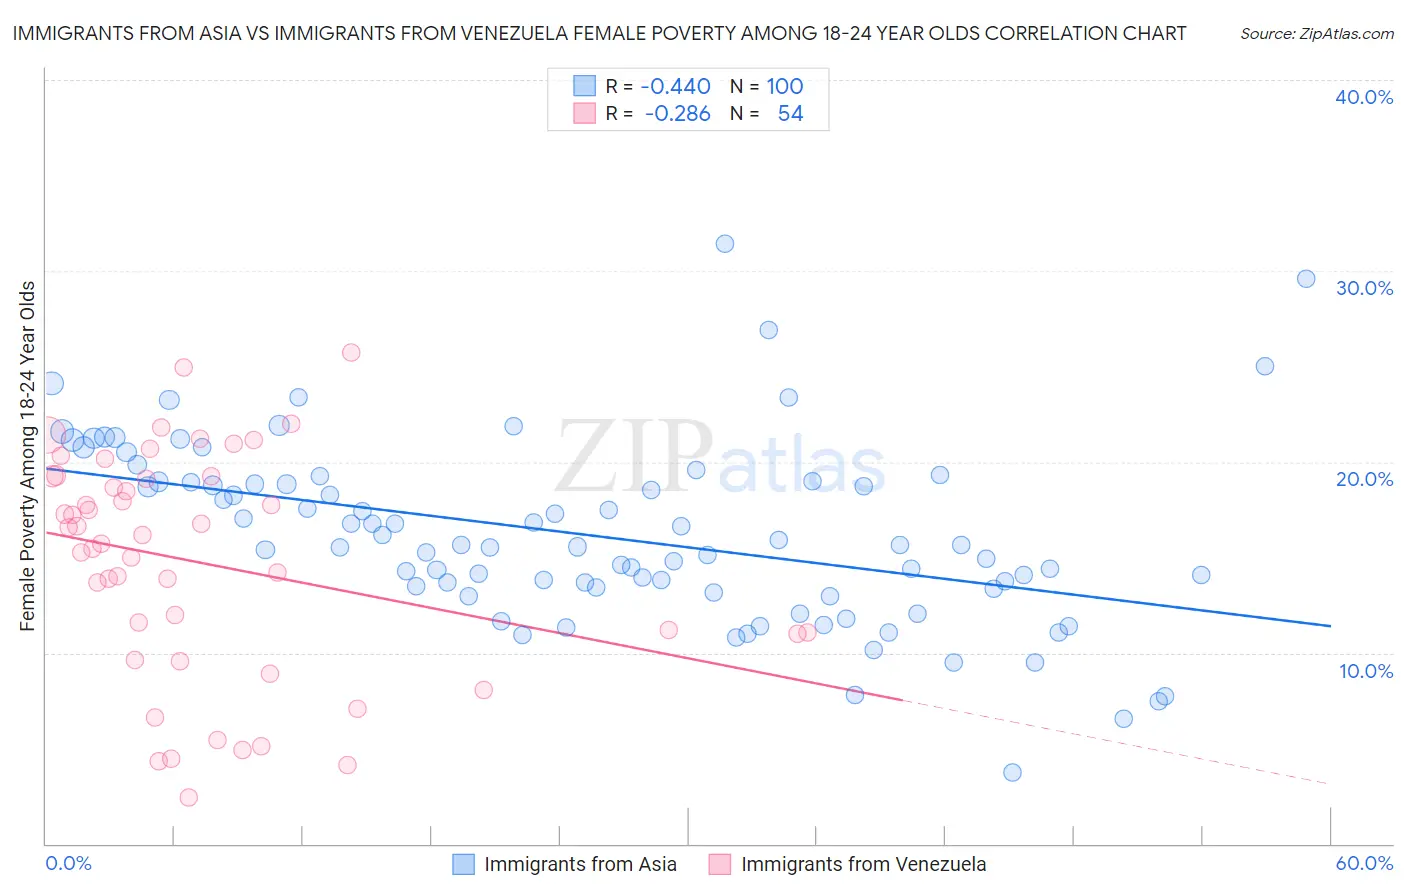 Immigrants from Asia vs Immigrants from Venezuela Female Poverty Among 18-24 Year Olds